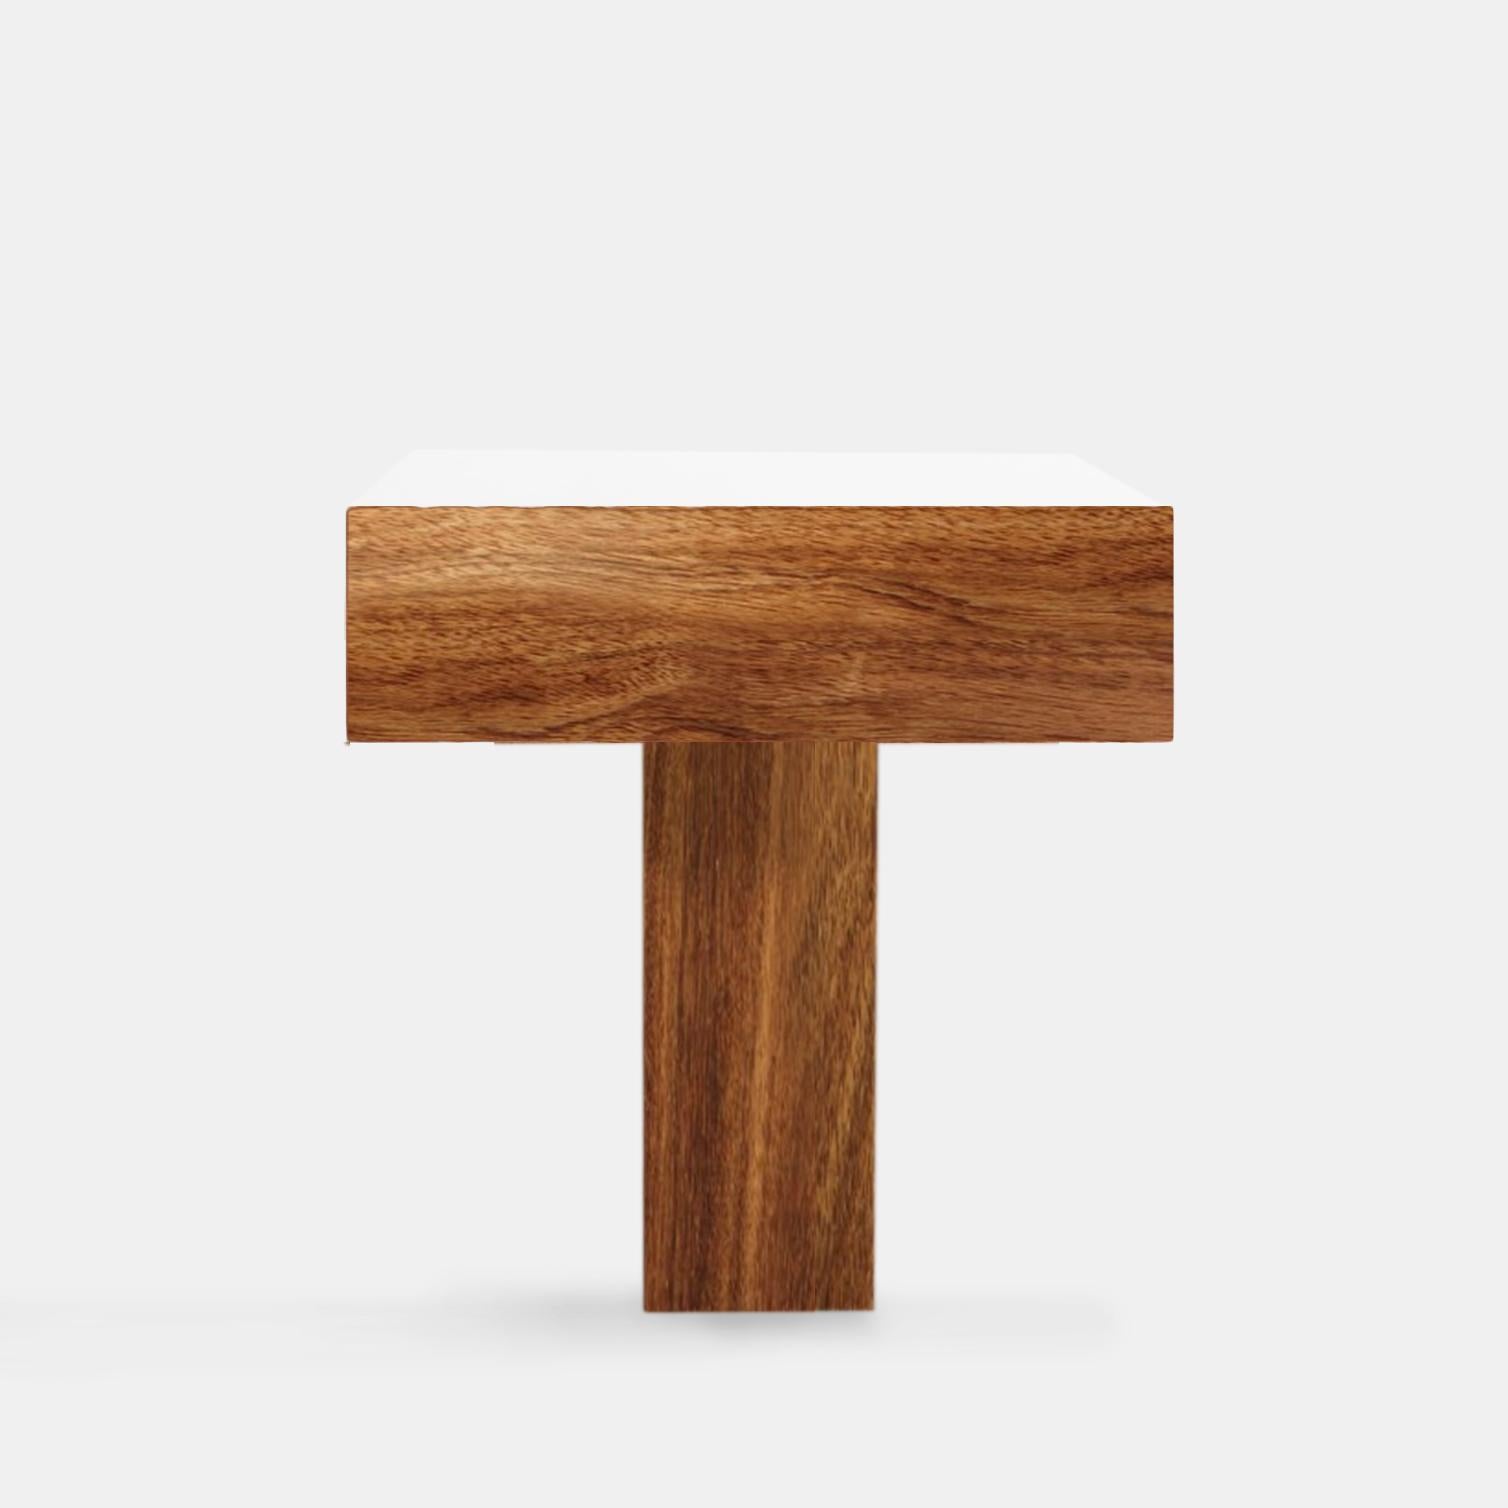 Contemporary Side Table in Brazilian wood. Natural of Brazil, Imbuia wood possesses deep, rich colors and interesting grain patterns that make every object unique. Designed with Minimalist lines and light visuals, the “Tee” side table is suitable